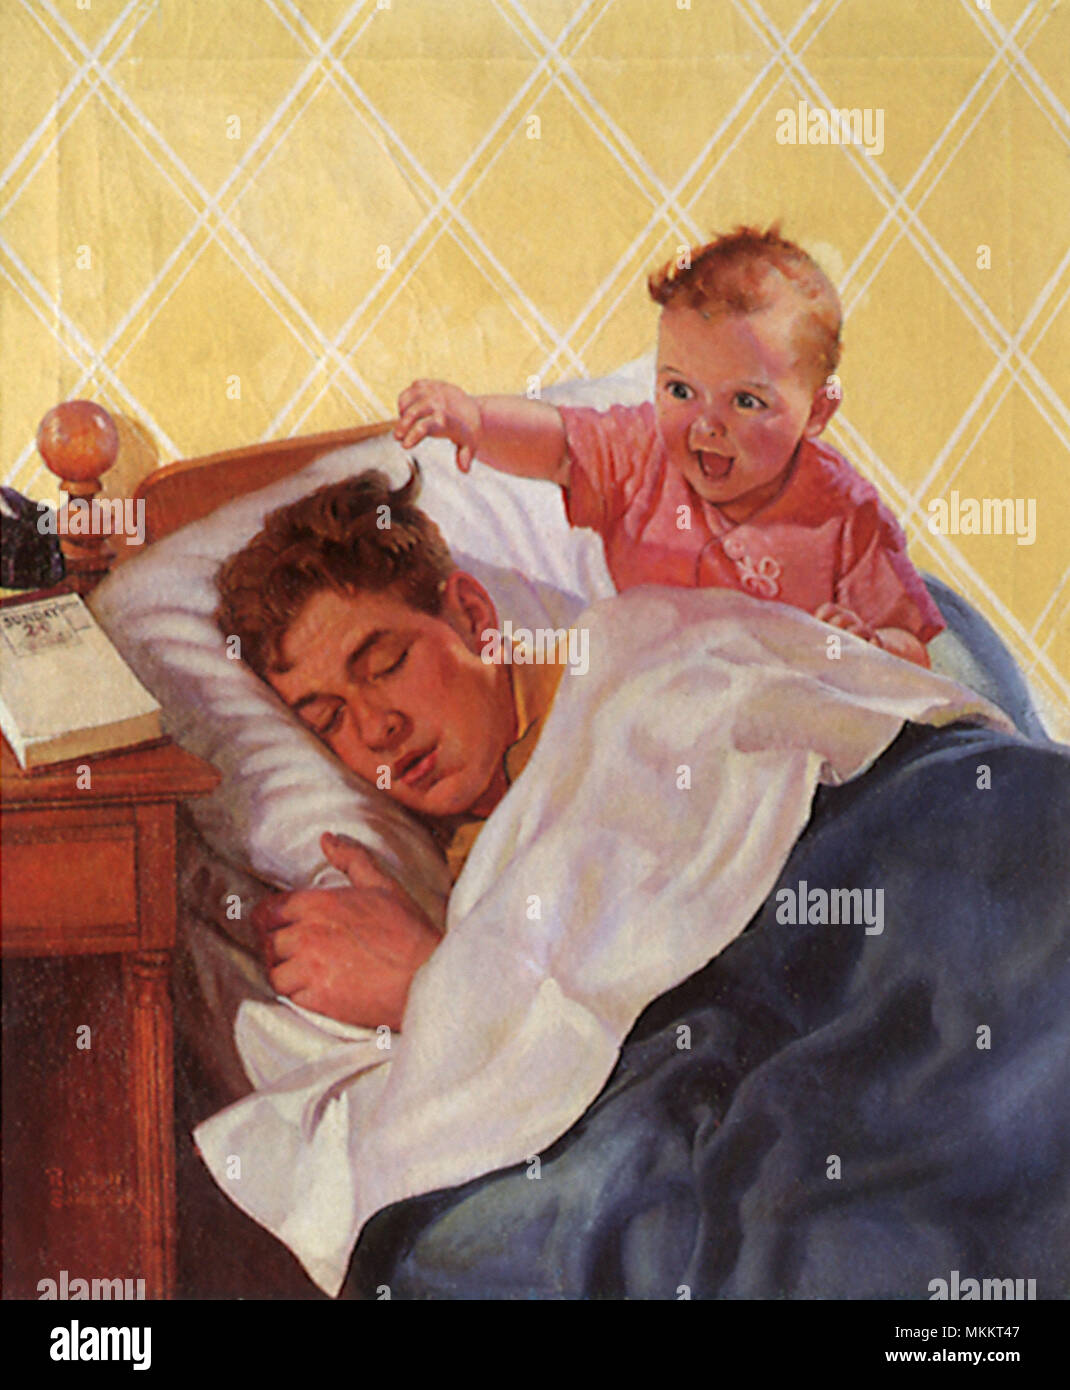 Tot Wakes Dad Rudely Stock Photo